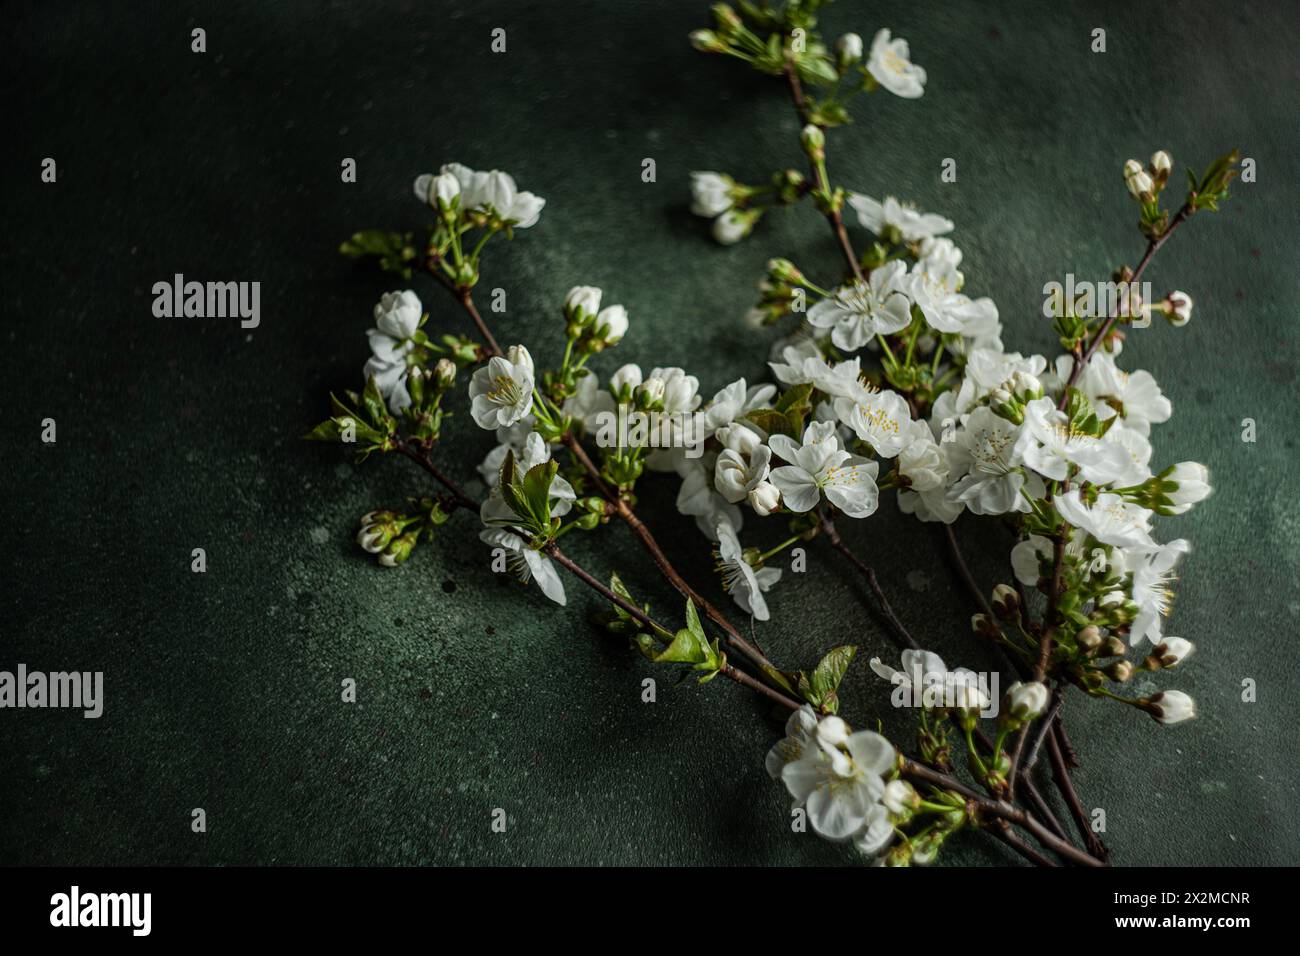 A beautiful arrangement of cherry blossom branches laid on a dark surface, perfect for a spring-themed table setting Stock Photo